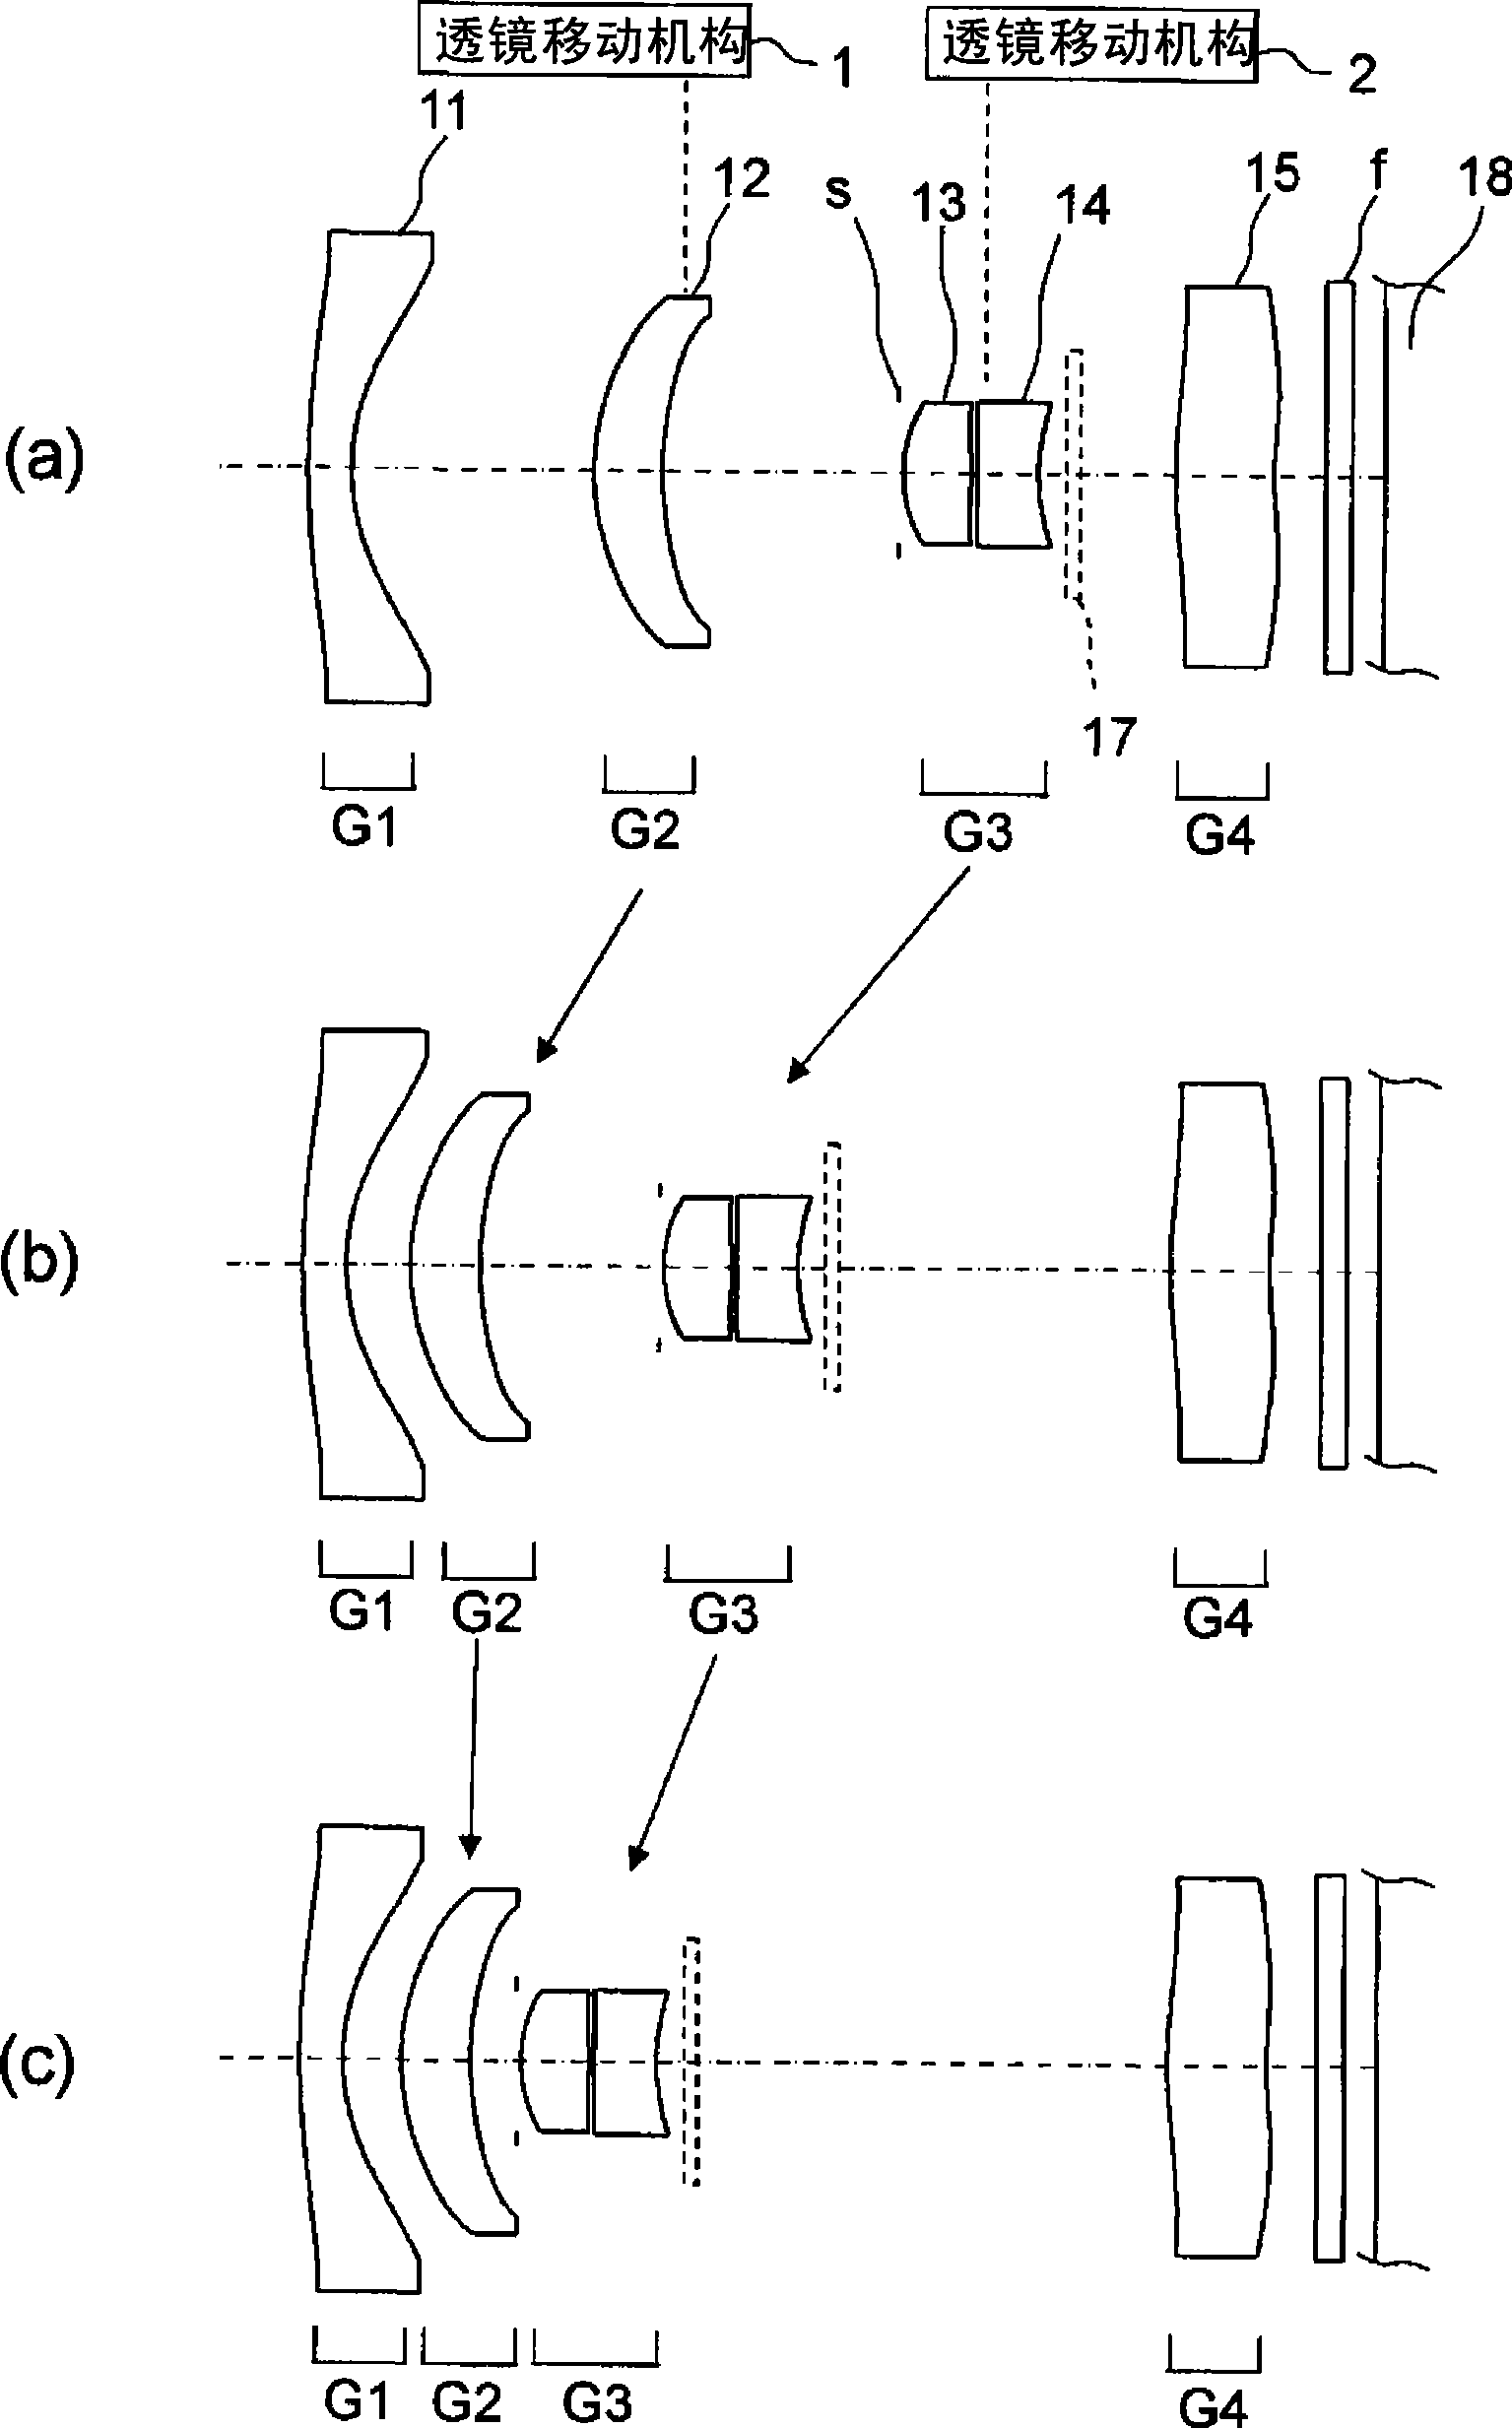 Zoom lens, digital camera, and portable information device